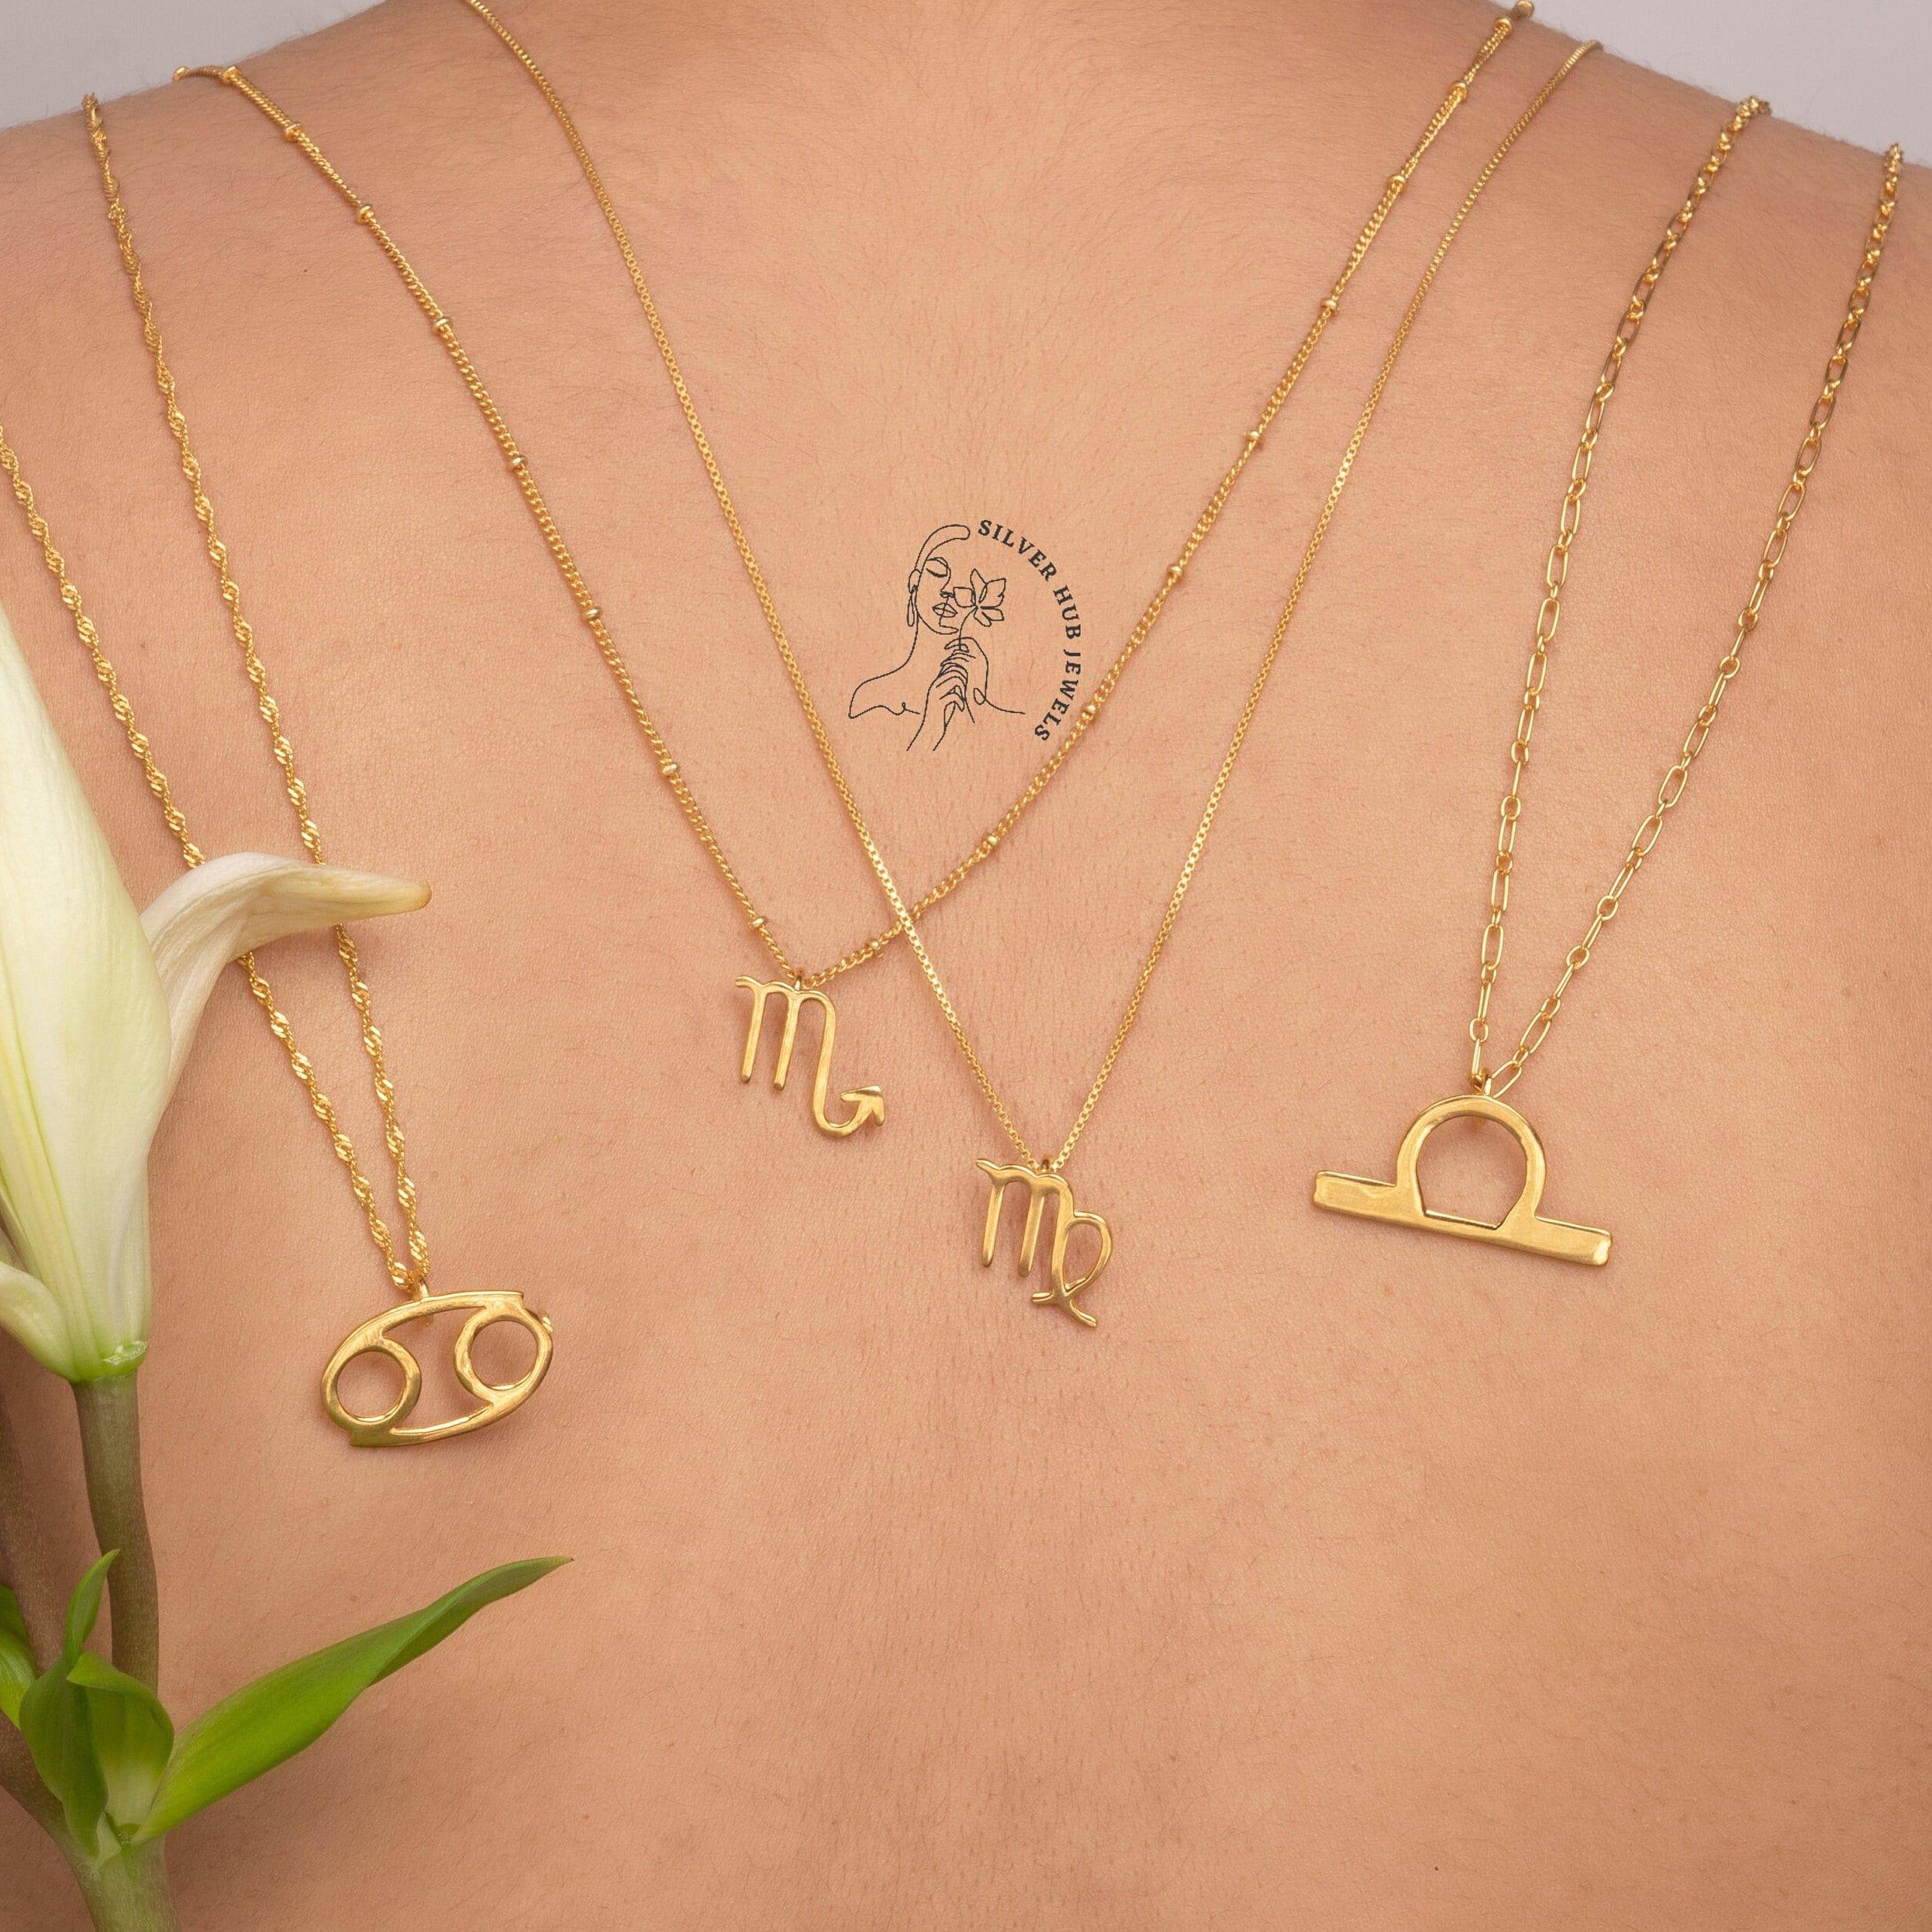 Astrology Necklace, Aries Zodiac Necklace, Birthstone Zodiac Necklace, Horoscope Necklace